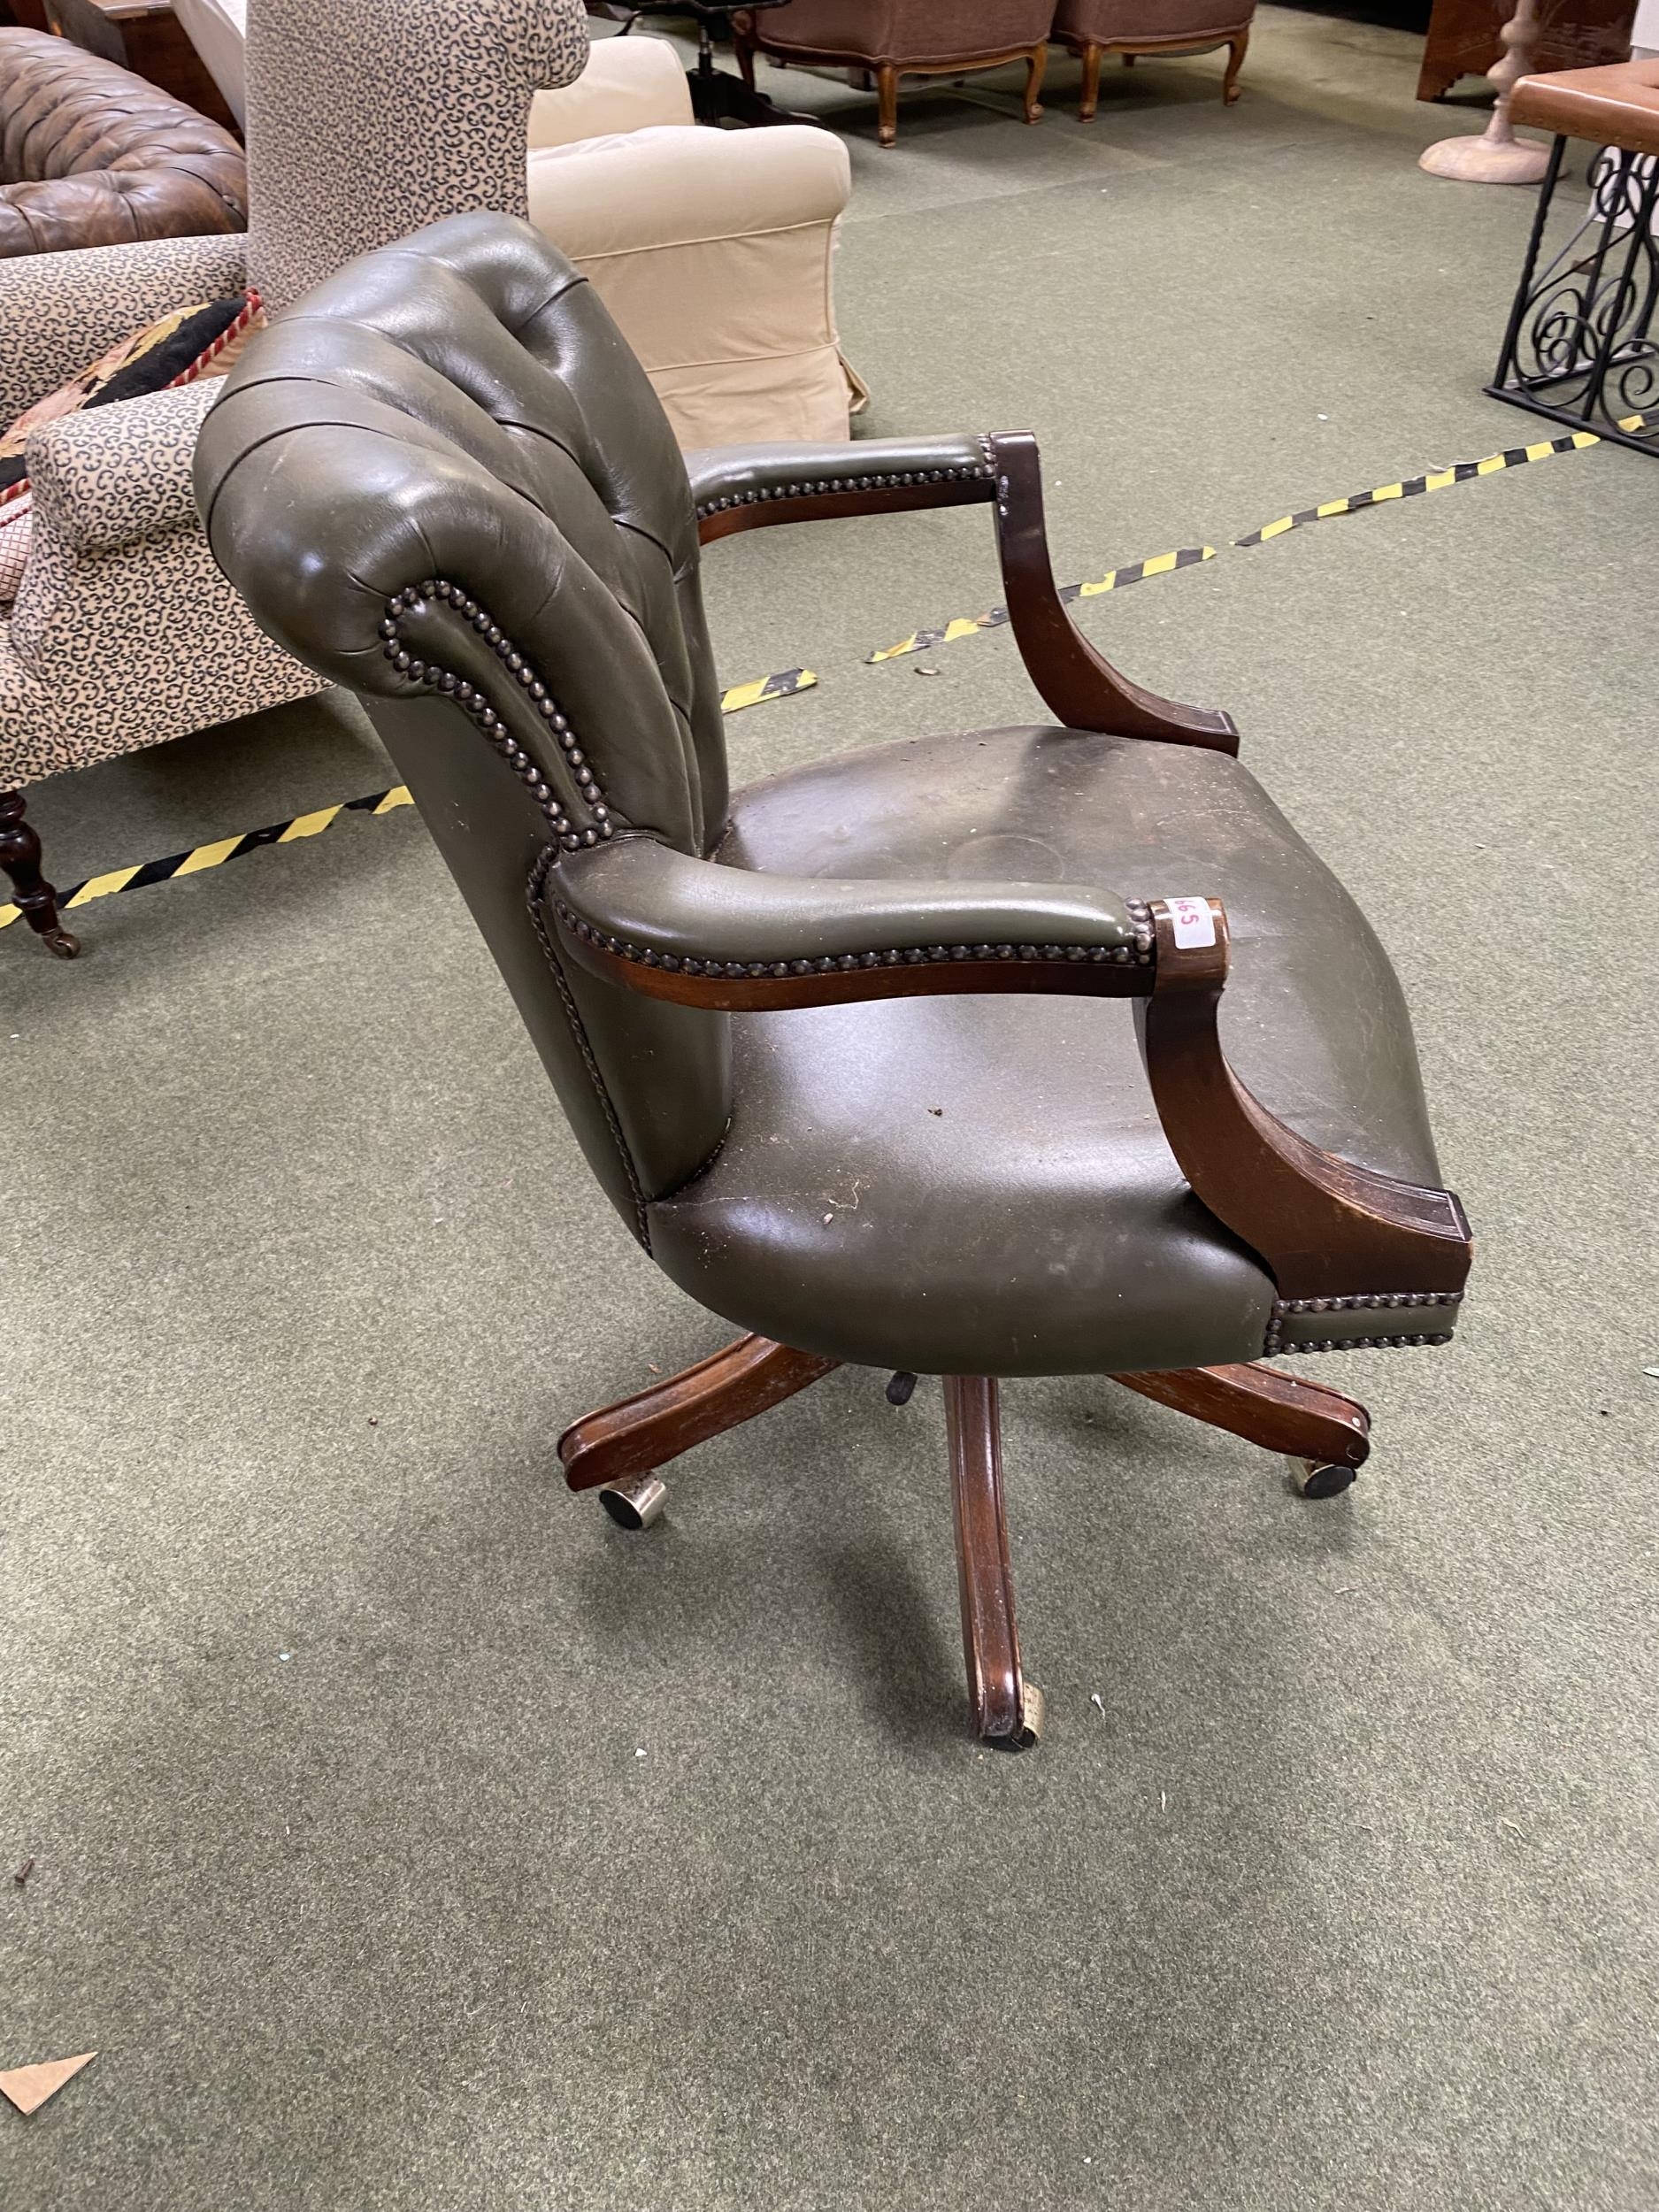 Green leather revolving chair, some wear and scuffs